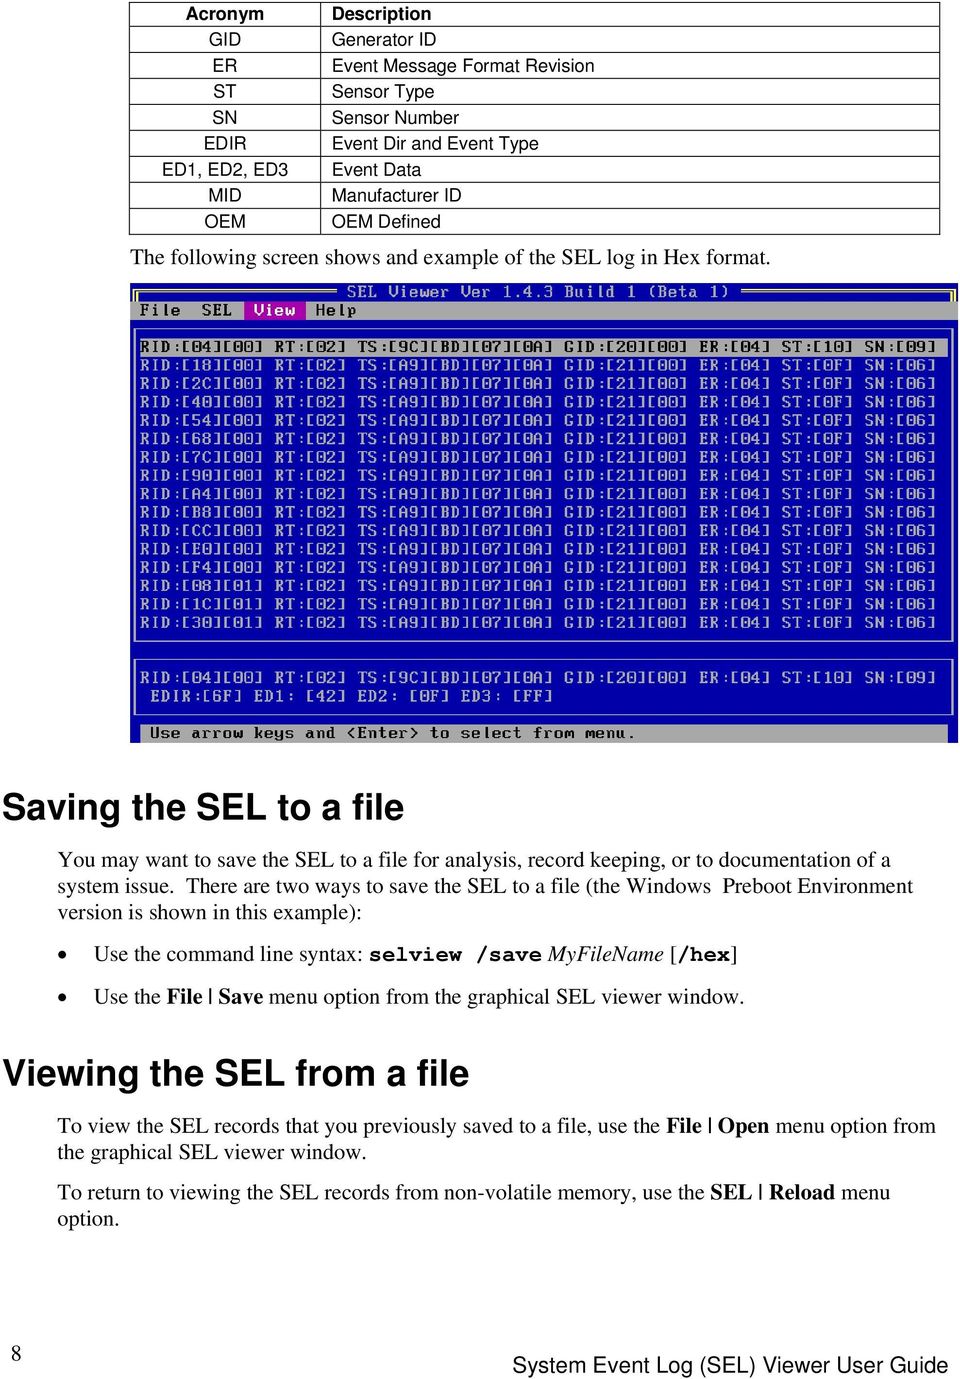 There are two ways to save the SEL to a file (the Windows Preboot Environment version is shown in this example): Use the command line syntax: selview /save MyFileName [/hex] Use the File Save menu